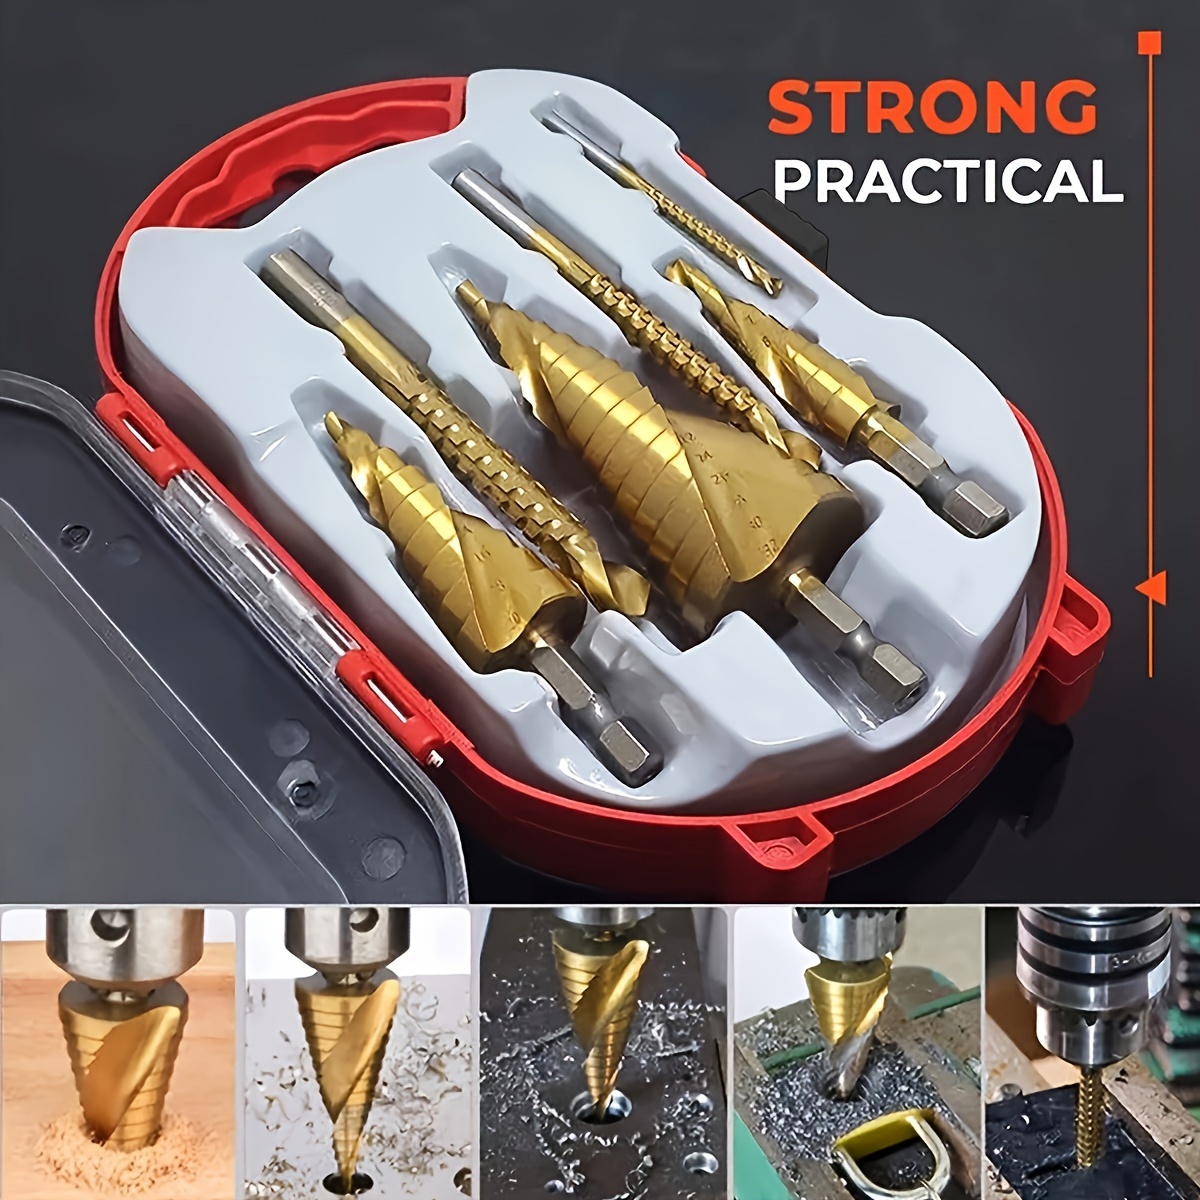 

6pcs High-speed Reaming Pagoda Sawtooth Set, Titanium Plating Drill Bit Set With Box, Multiple Hole Stepped Up Bits For Sheet Metal, Tile Glass Diy Lovers